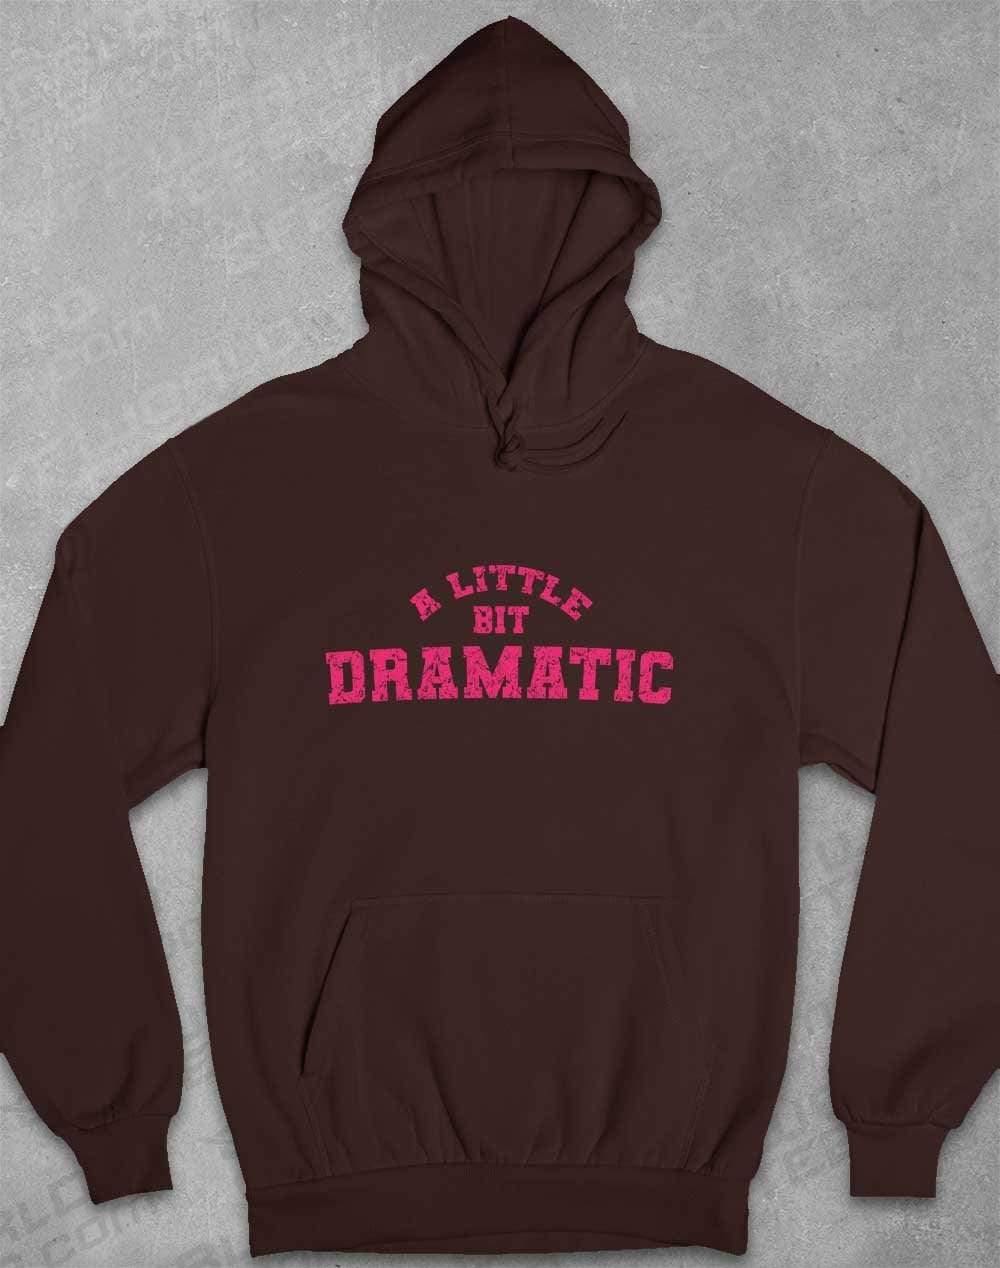 A Little Bit Dramatic Distressed Hoodie XS / Hot Chocolate  - Off World Tees